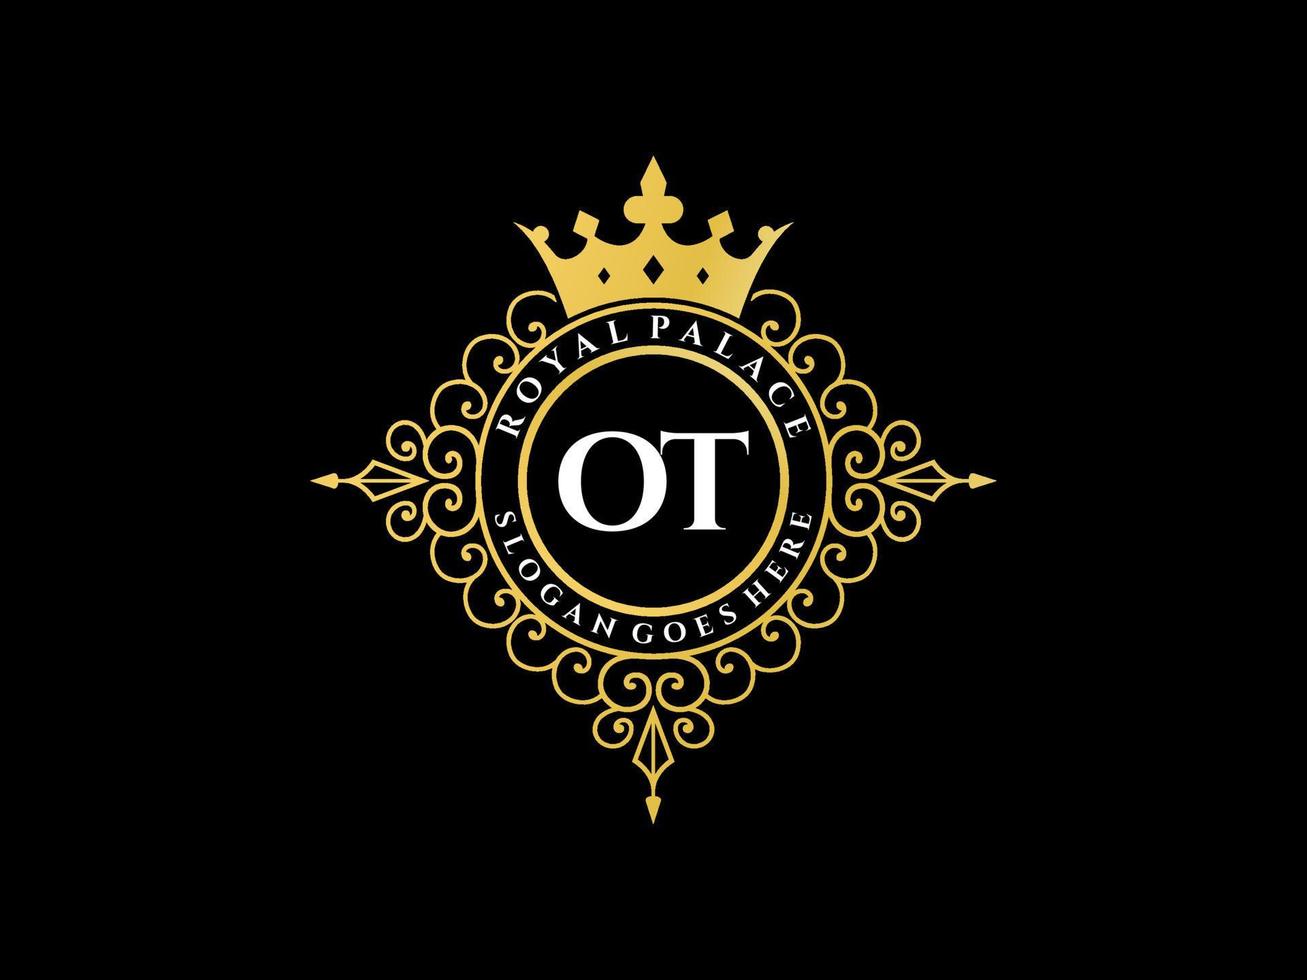 Letter OT Antique royal luxury victorian logo with ornamental frame. vector